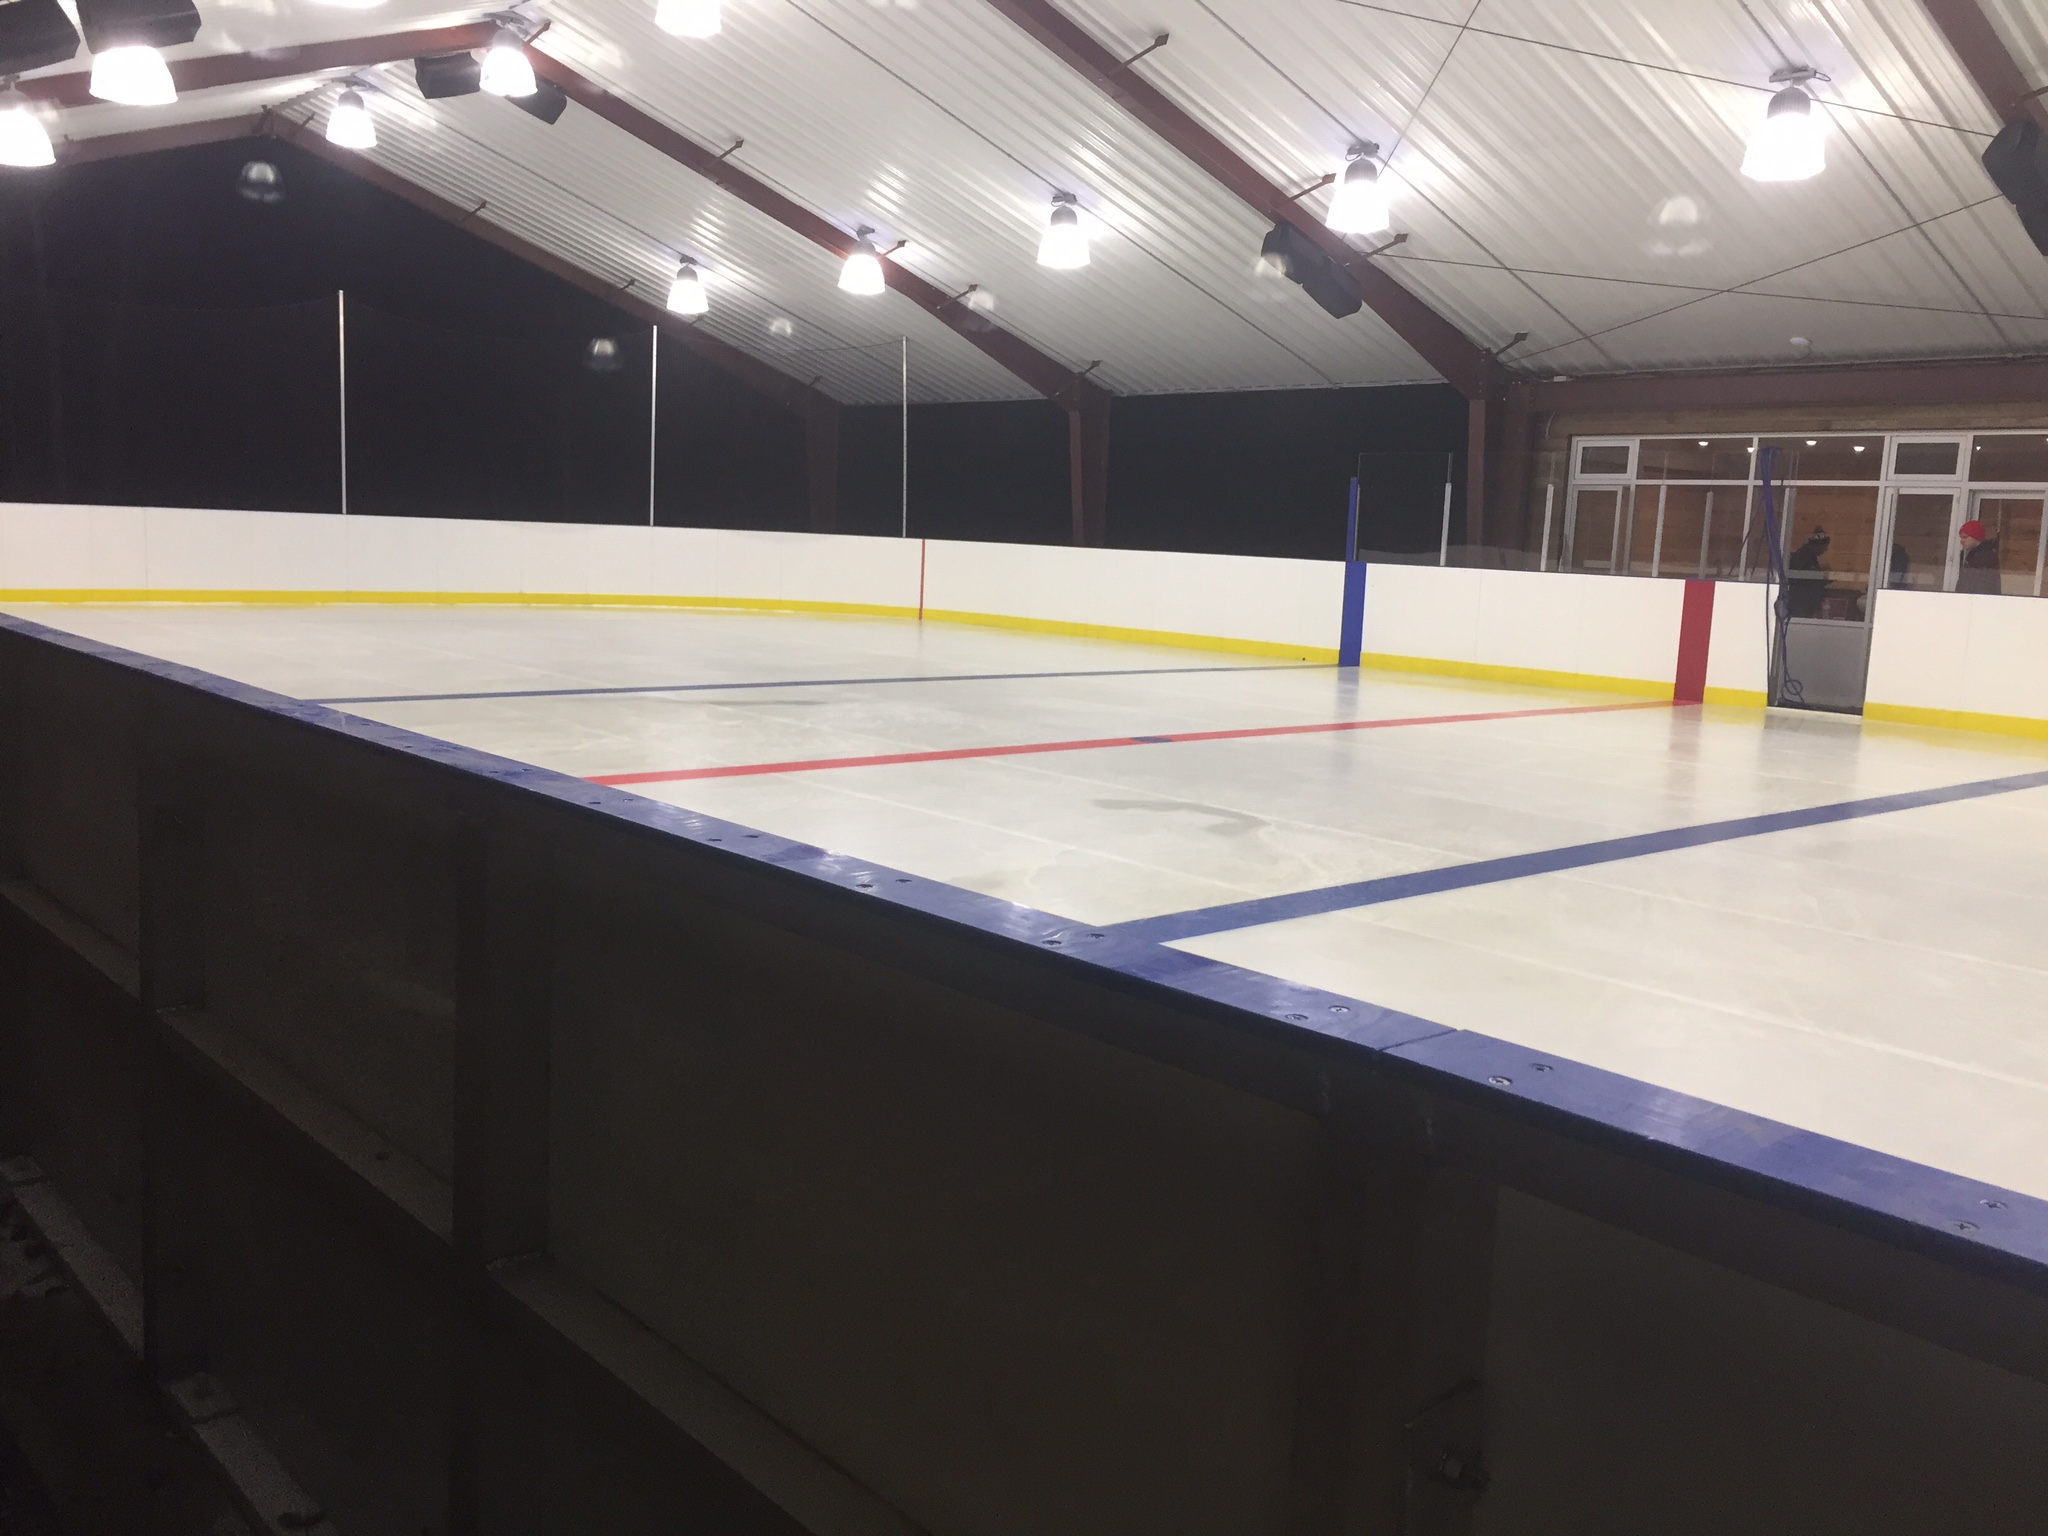 Permanent refrigerated rink